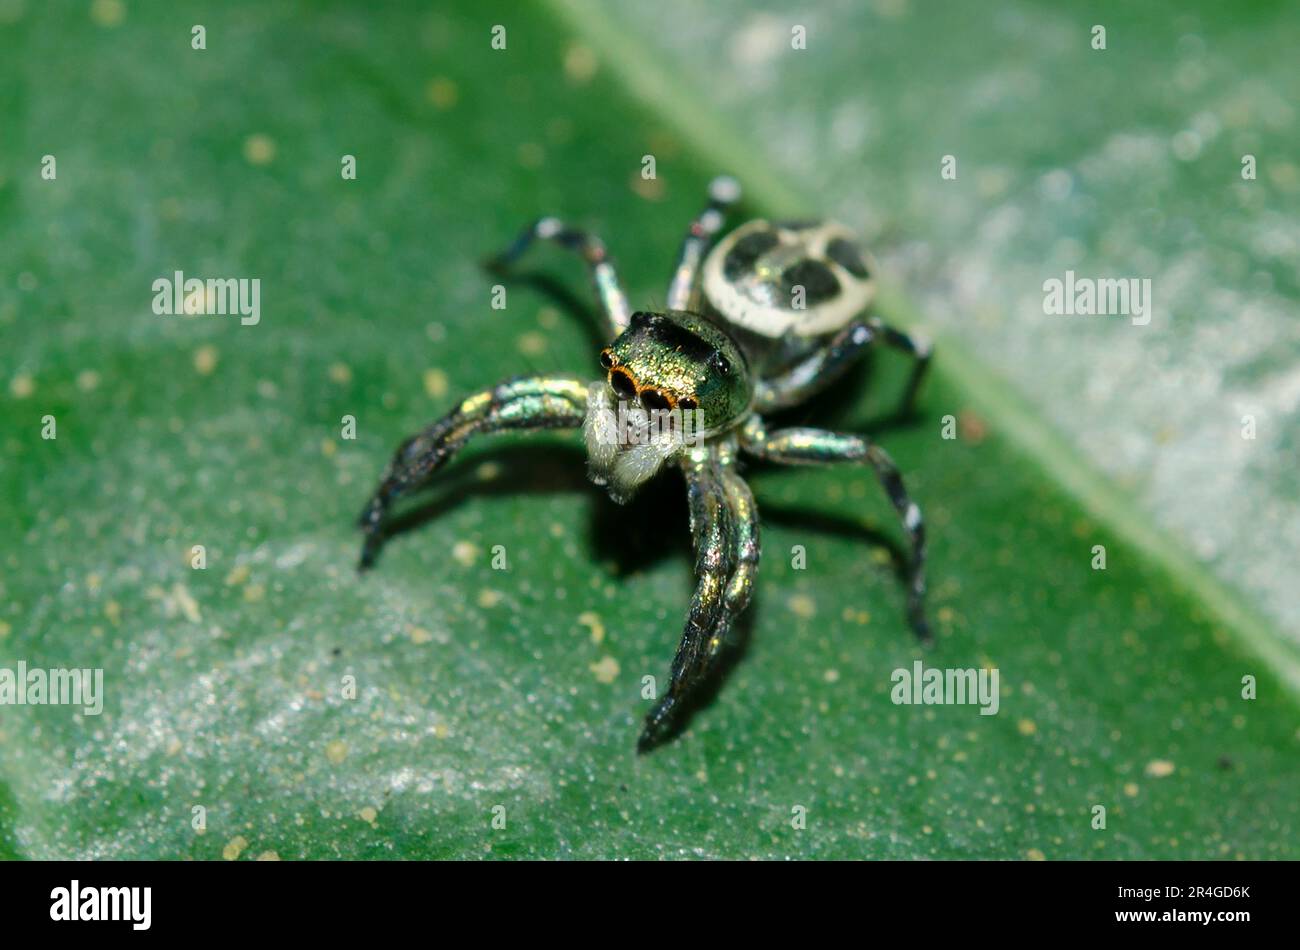 Jumping Spider, Cosmophasis sp, on leaf, Klungkung, Bali, Indonesia Foto Stock